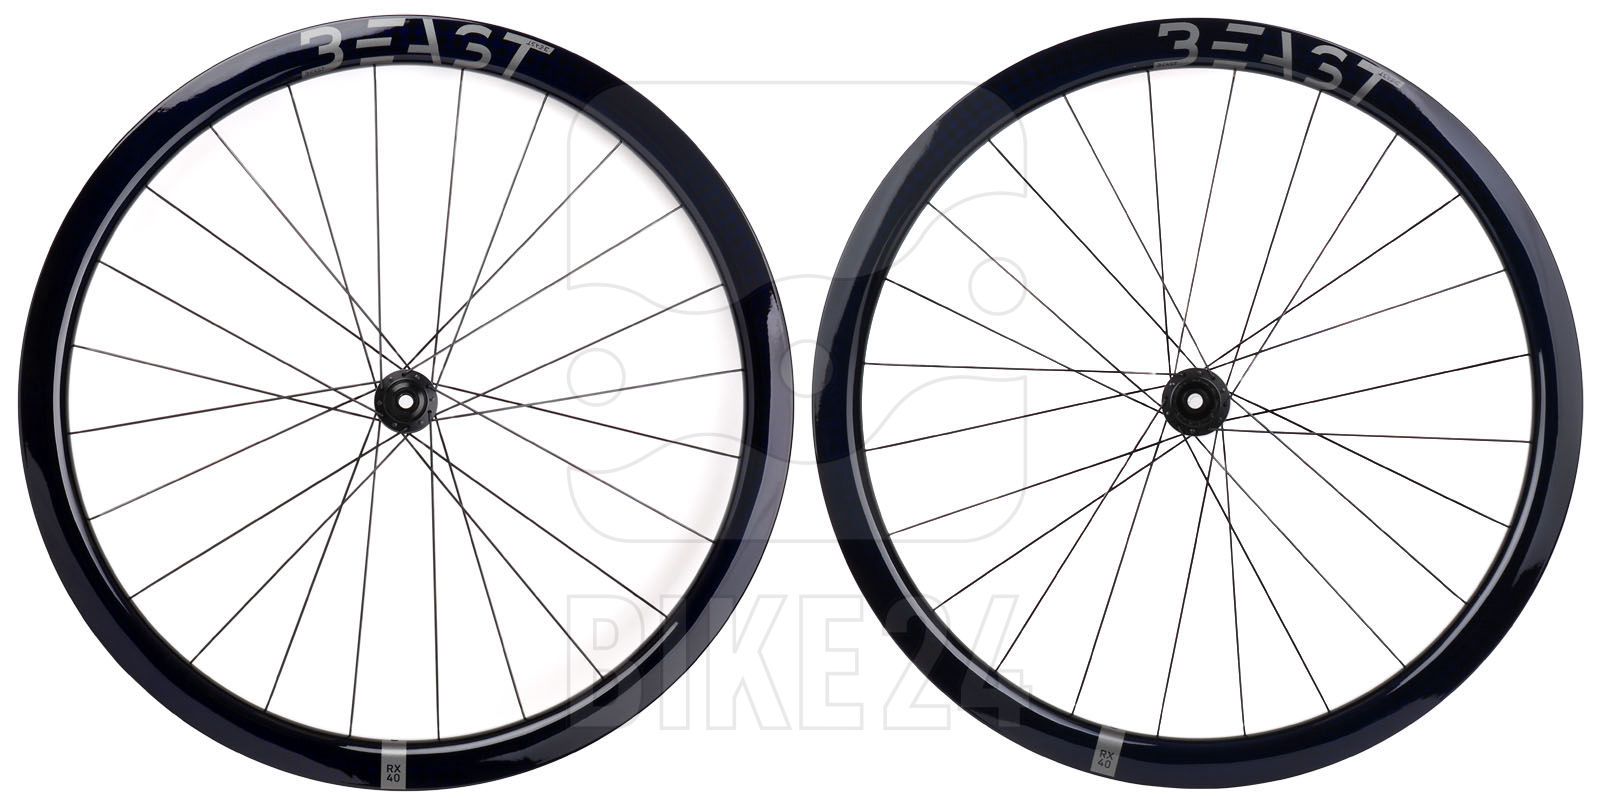 Picture of Beast Components RX40 + DT Swiss 240 Carbon Wheelset - Center Lock - FW: 12x100mm | RW: 12x142mm - SQUARE blue